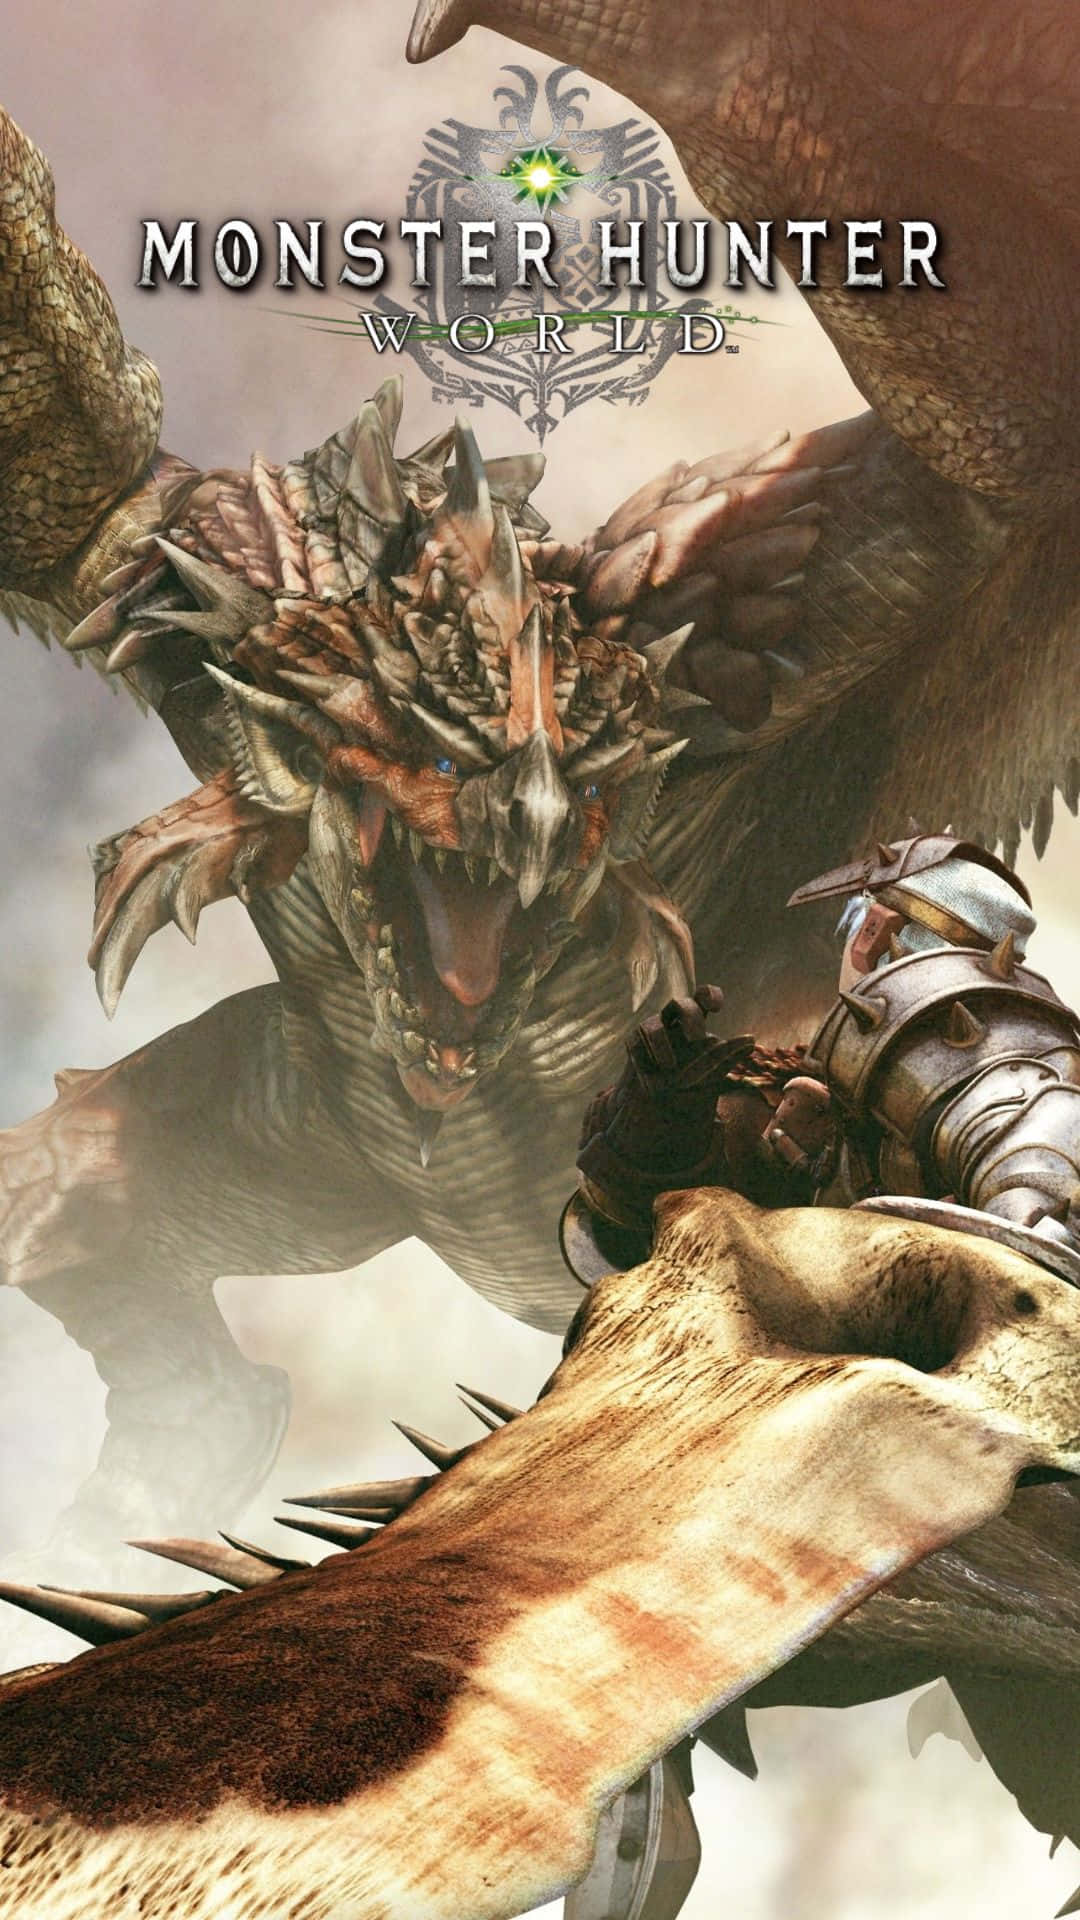 Explore the digital landscape of Monster Hunter World with your Android device.